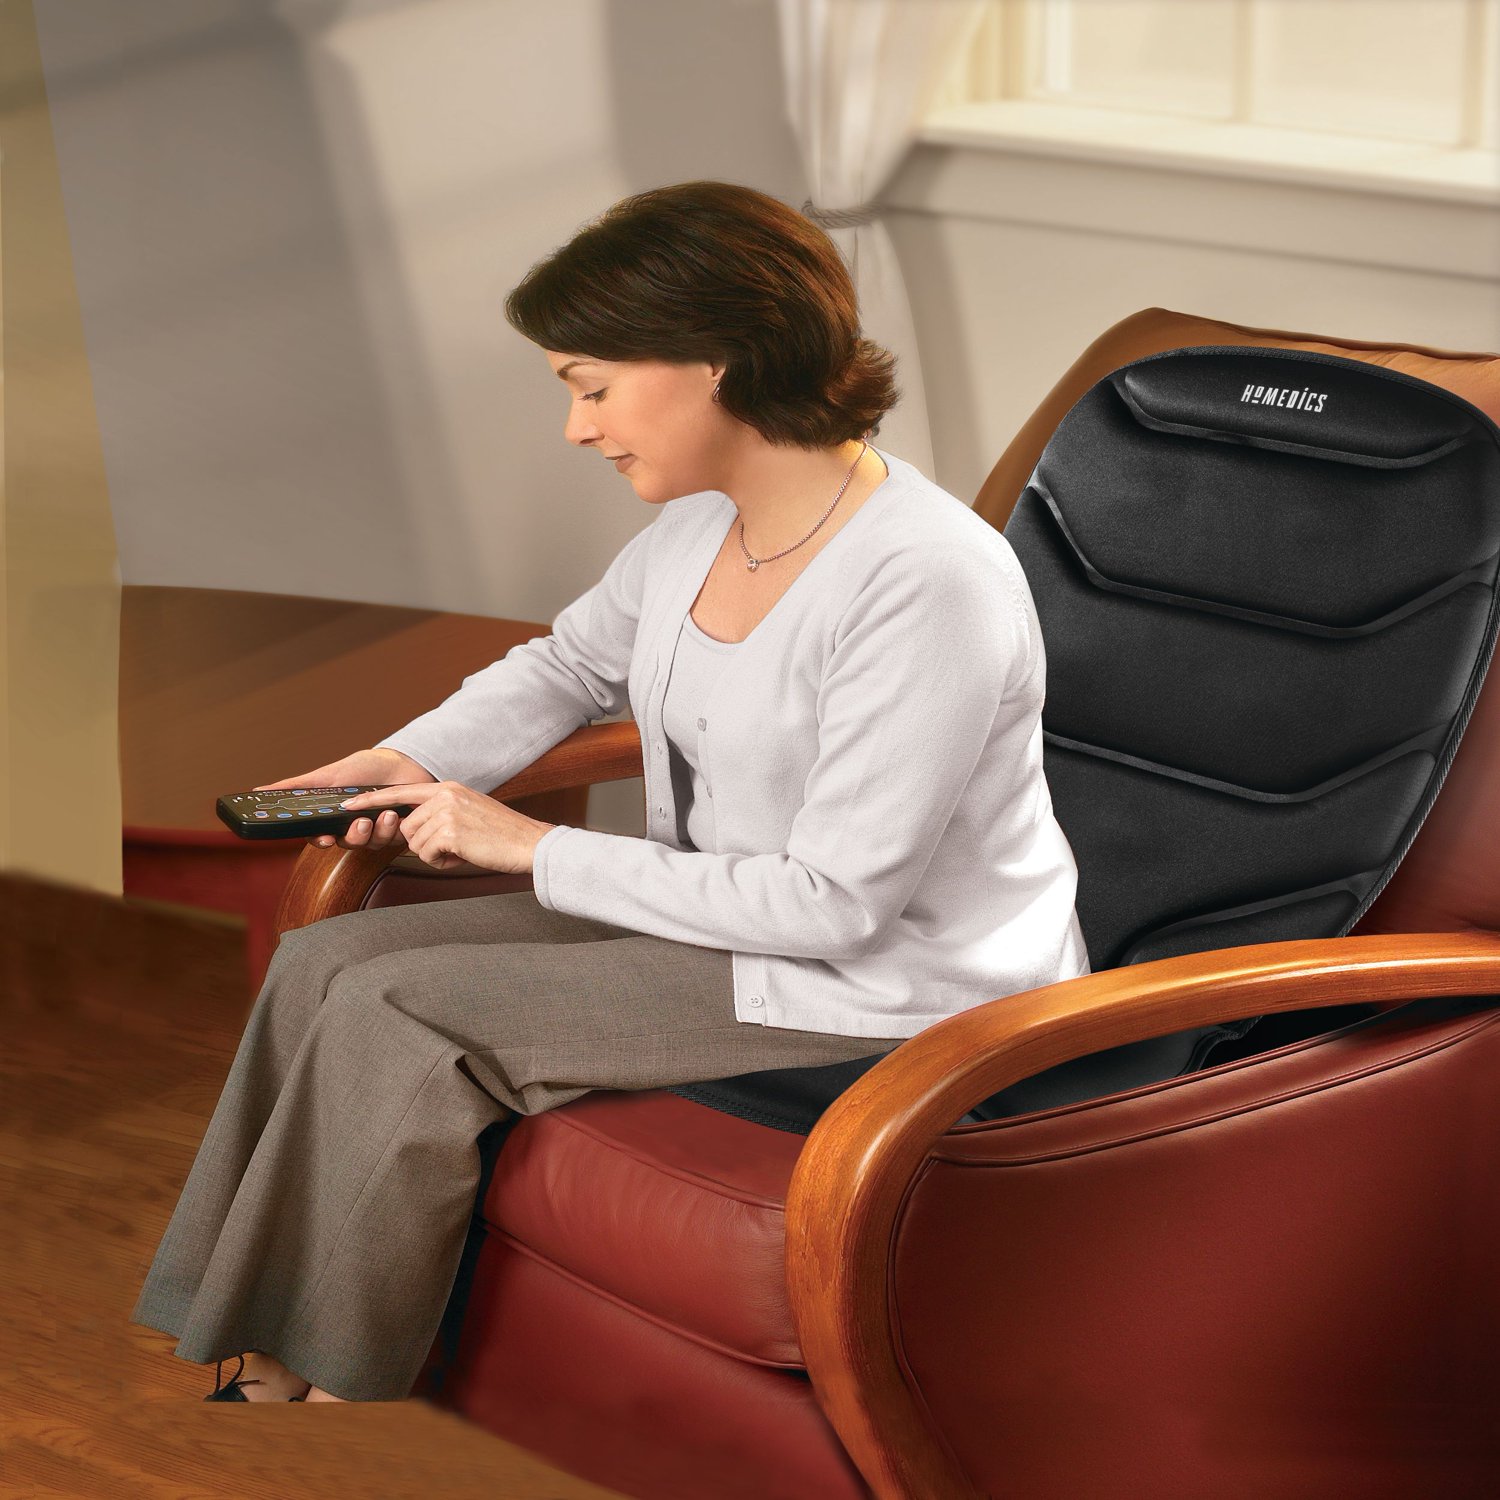 HoMedics Massage Comfort Cushion with Heat, Integrated Control for Back - image 3 of 9